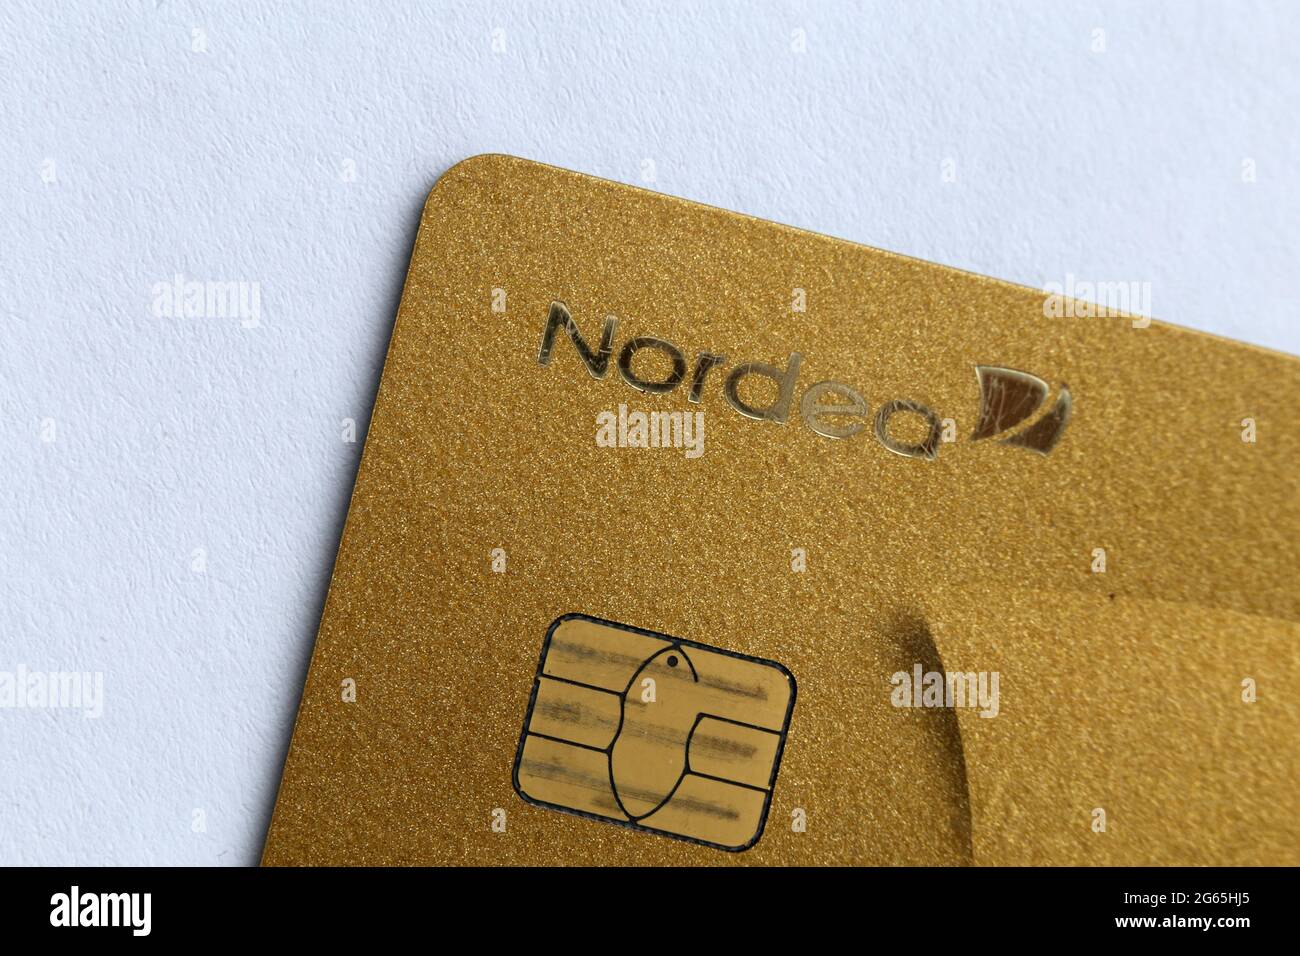 MasterCard Gold credit / debit card with contactless payment option in a closeup. Perfect card for luxury living. April 2020, Espoo, Finland. Stock Photo